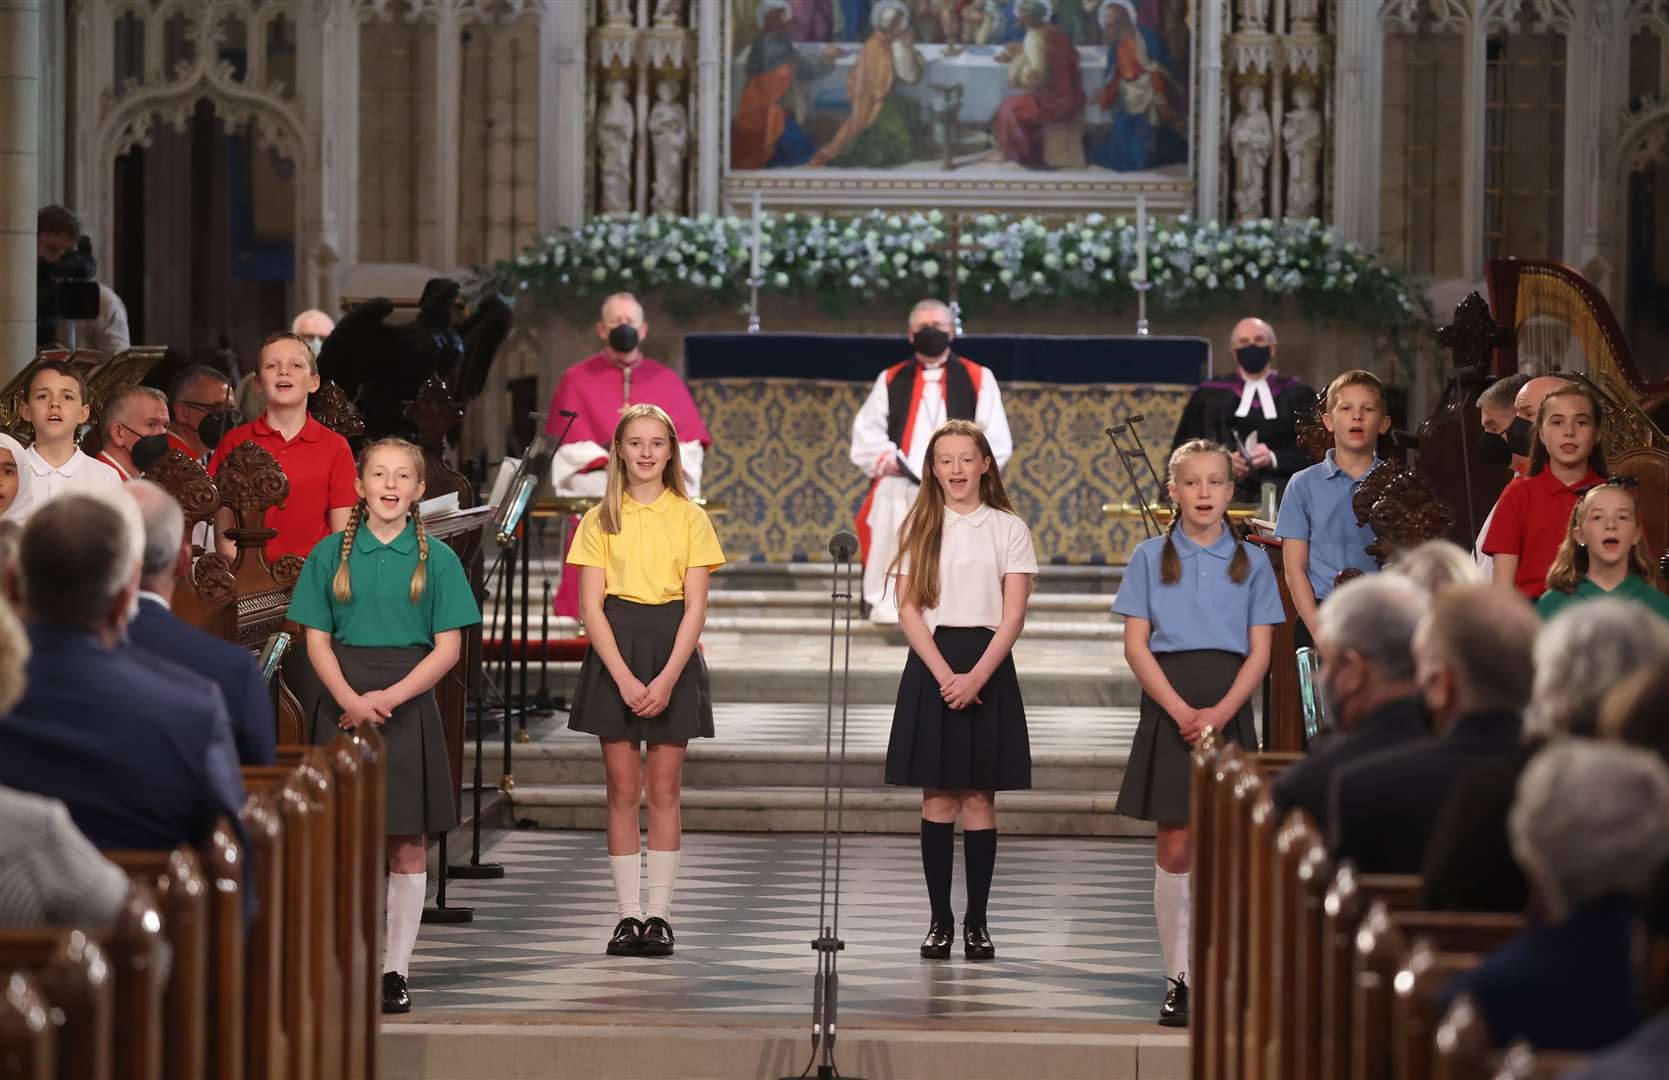 Children from local schools sing during a service at St Patrick’s Cathedral (Liam McBurney/PA)